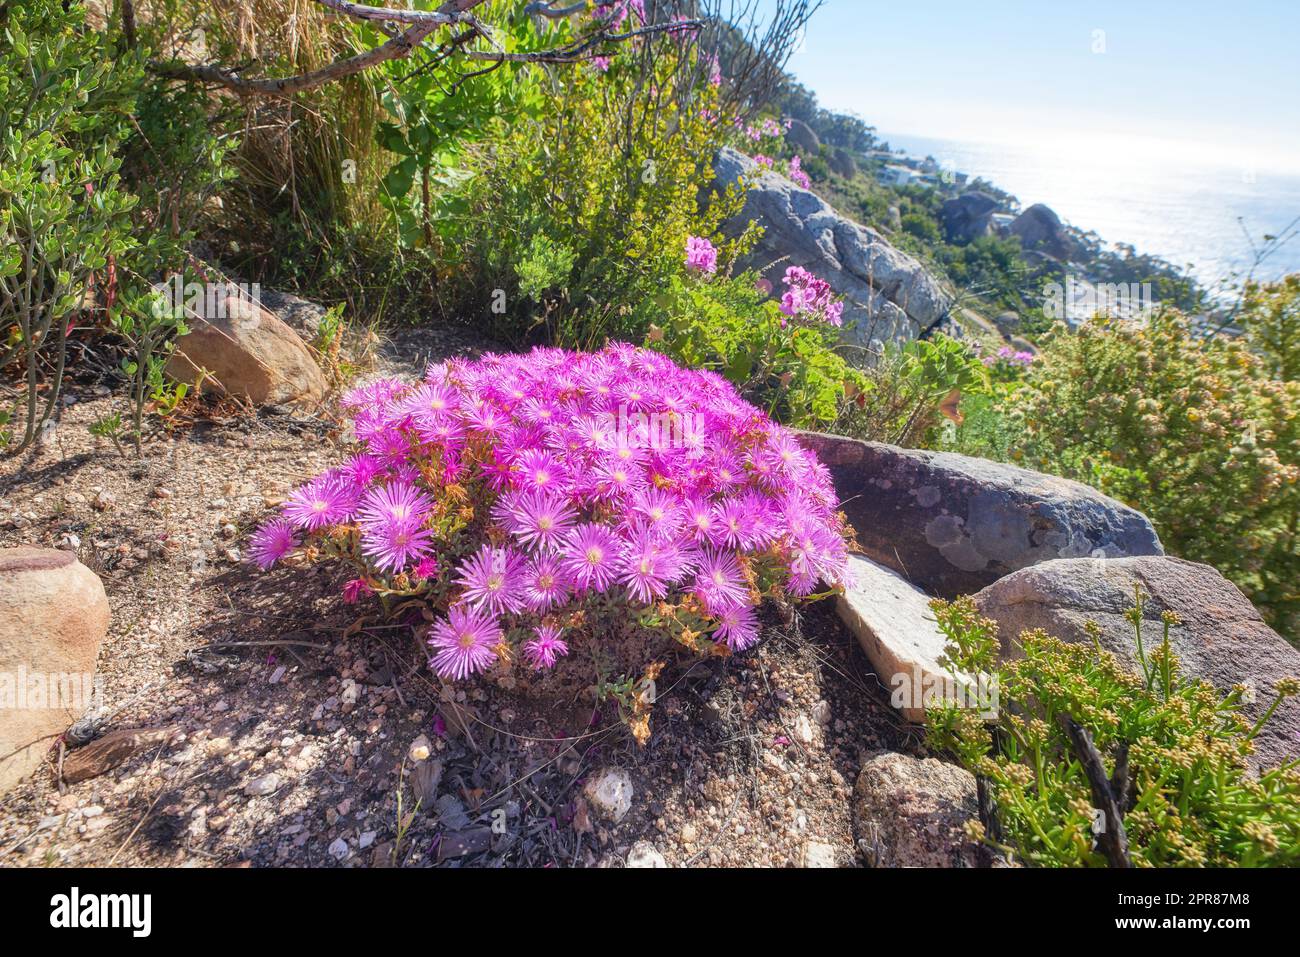 Pink aster fynbos flowers growing on rocks on Table Mountain, Cape Town, South Africa. Lush green bushes and shrubs with flora and plants in peaceful, serene and uncultivated nature reserve in summer Stock Photo